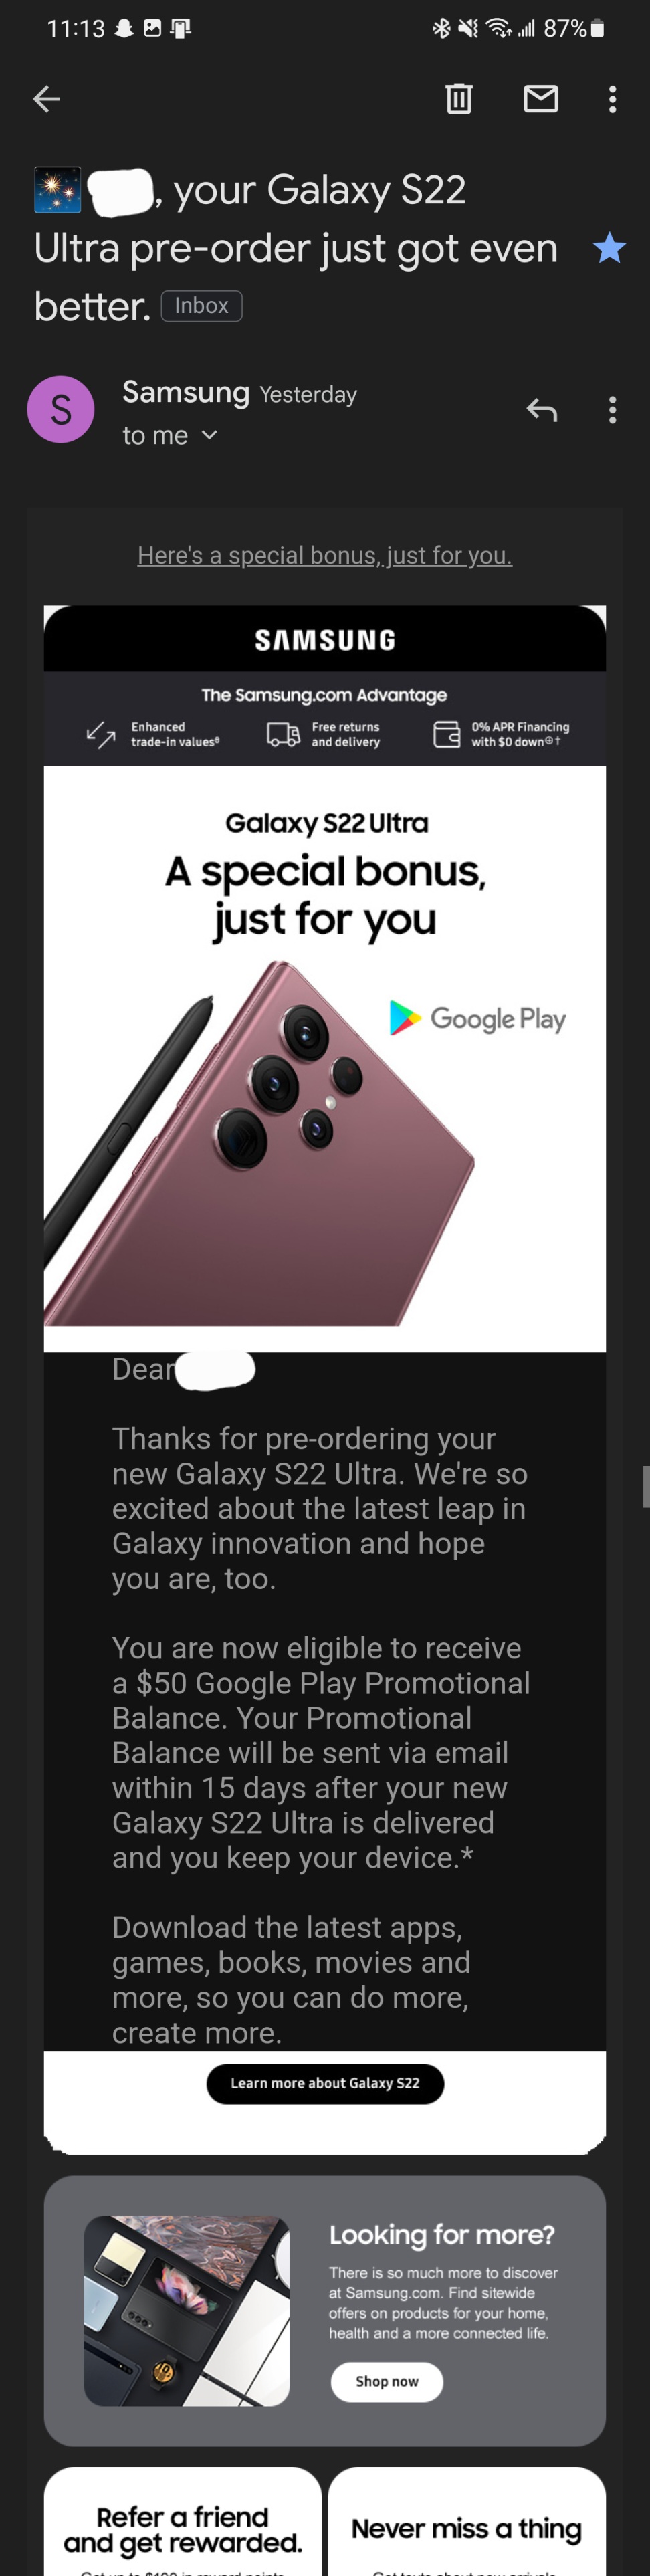 YMMV Free $50 Google Play Promotional Balance with S22 Ultra Pre-Order from Samsung.com